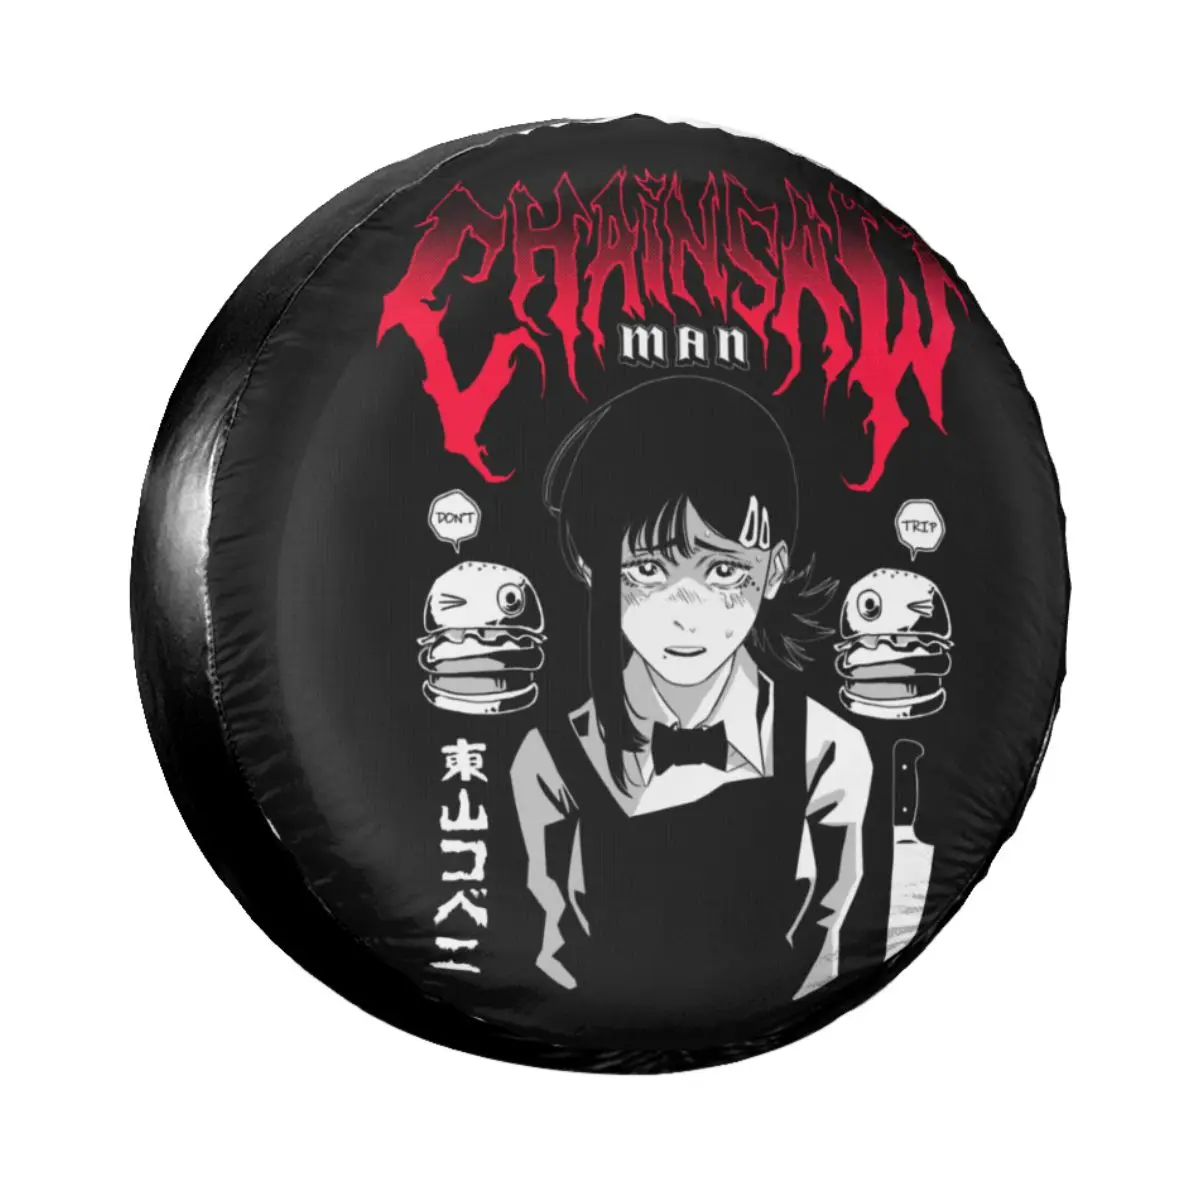 Chainsaw Man Spare Tire Cover Case Bag Pouch for Jeep Mitsubishi Anime Manga Aki Hayakawa Car Wheel Protectors Accessories Tire Cover Car Covers